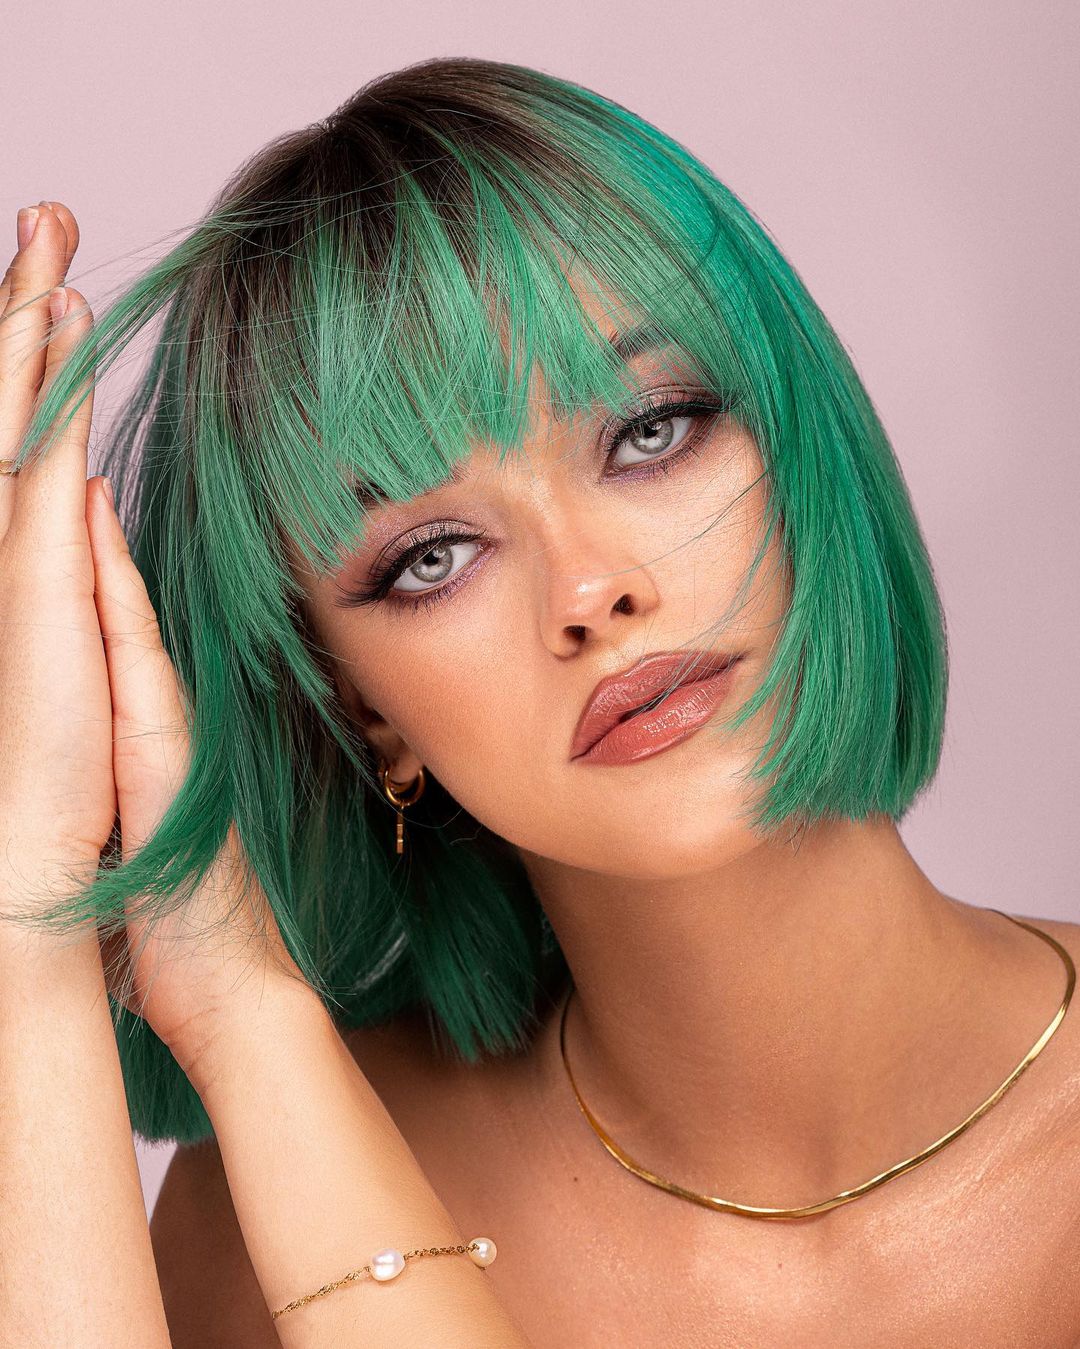 You're Fed up of Your Rainbow Hair. Now What?